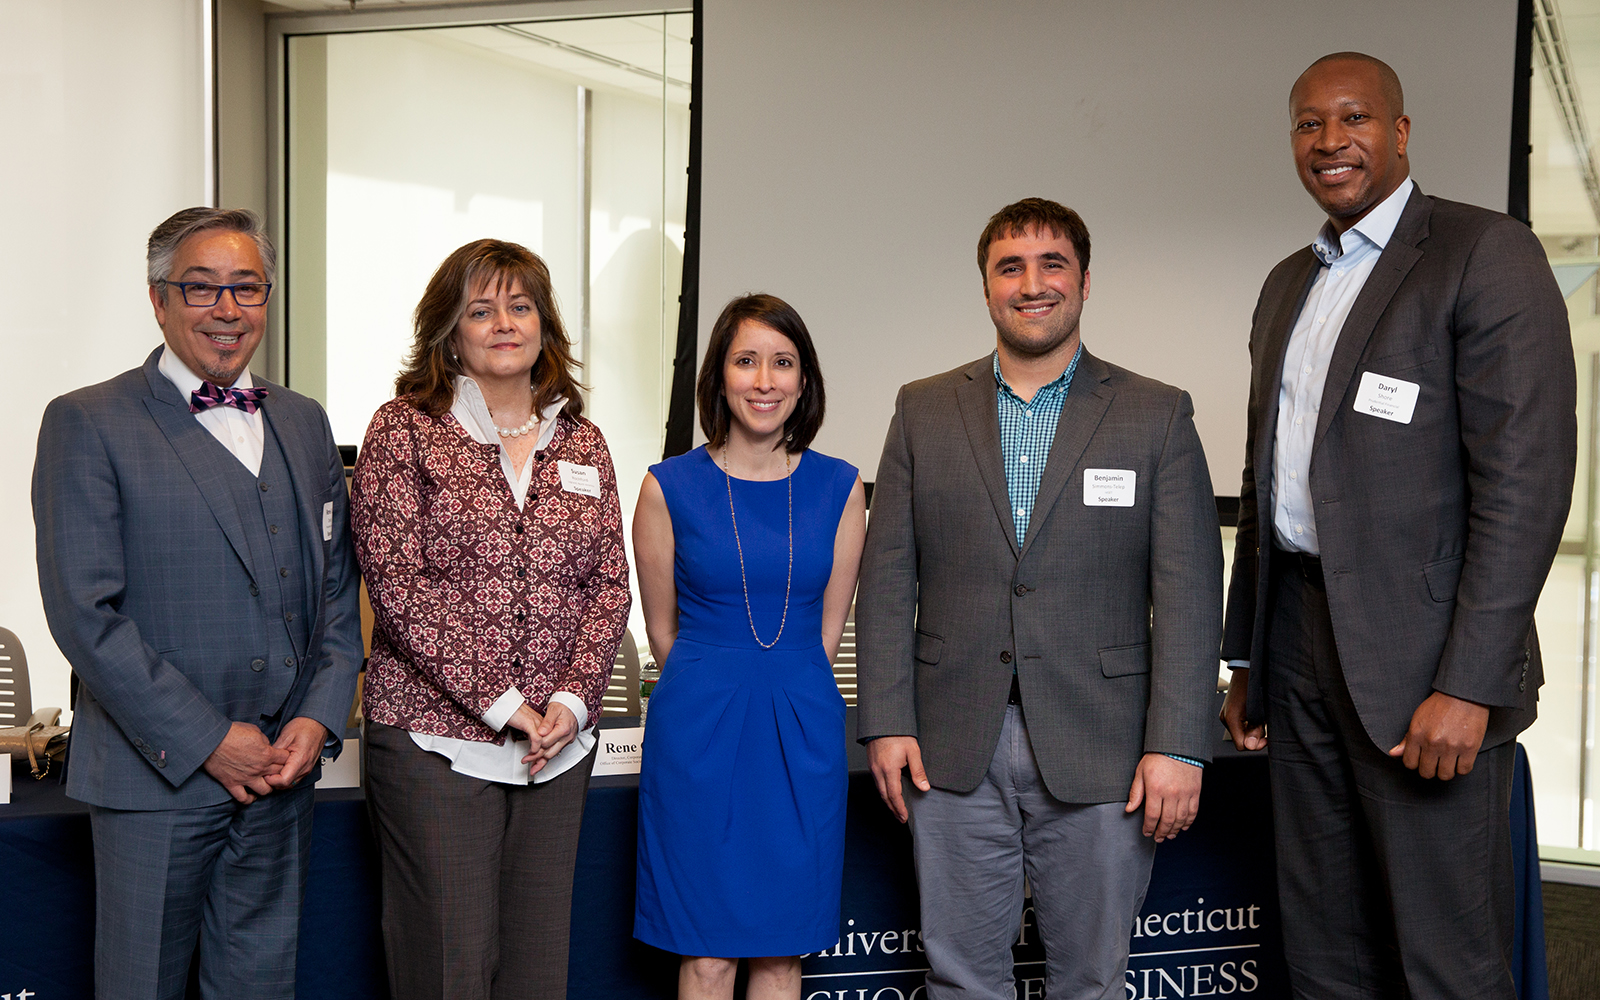 The April 10 NetImpact program, titled, "Careers for the Common Good: The Value of Sustainability in Business" featured panelists Rene O. Deida, Susan Rochford, Sara Bronin, Benjamin Simmons-Telep, and Daryl Shore (Zack Wussow)